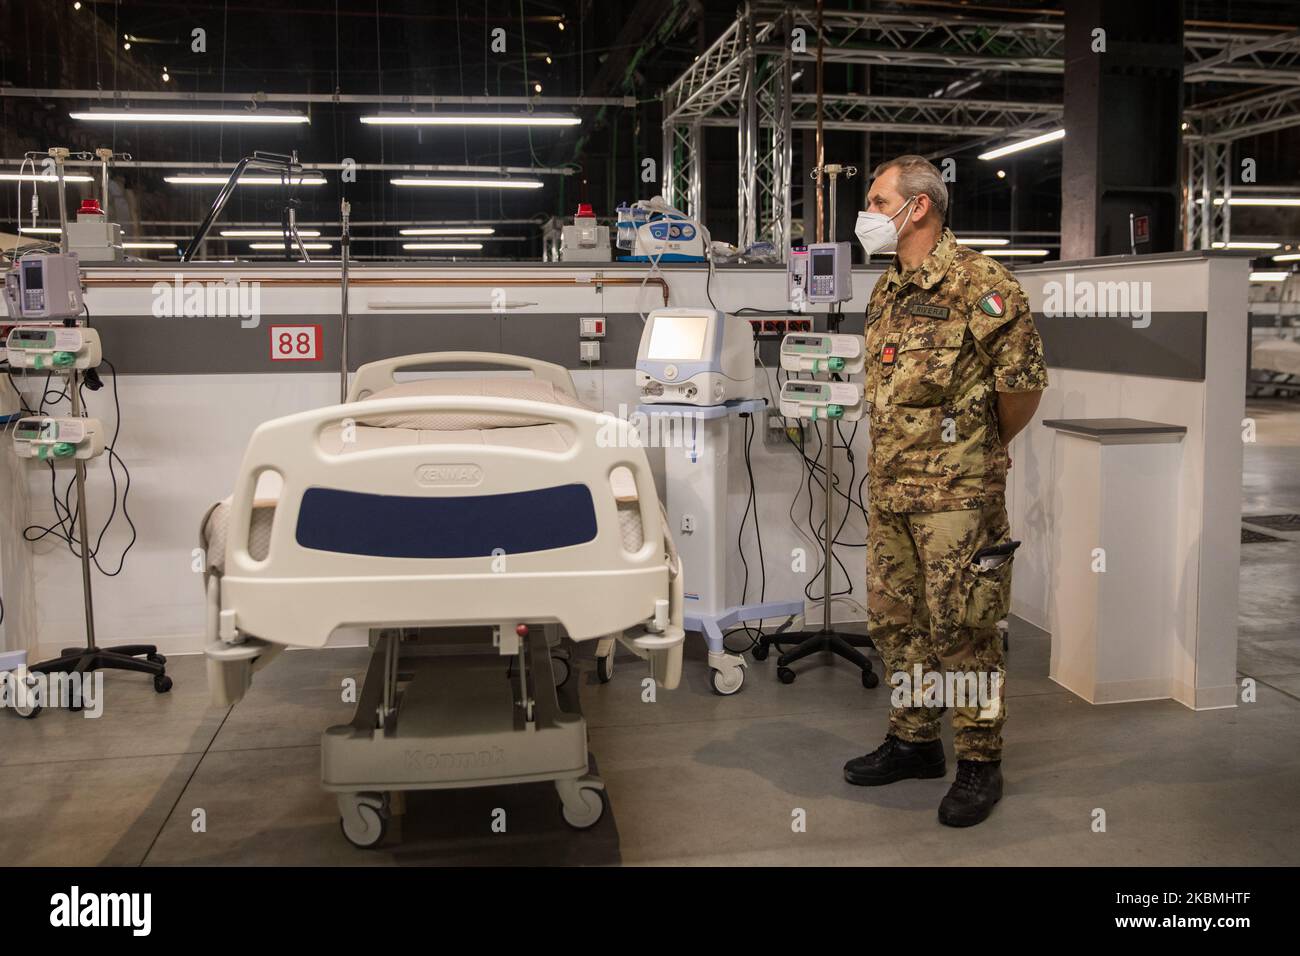 The Italian Army helped set up the hospital on April 18, 2020 in Turin, Italy. The 'Officine grandi riparazioni OGR' will house a large temporary hospital with an intensive care unit, sub-intensive care unit and places for hospitalization. (Photo by Mauro Ujetto/NurPhoto) Stock Photo